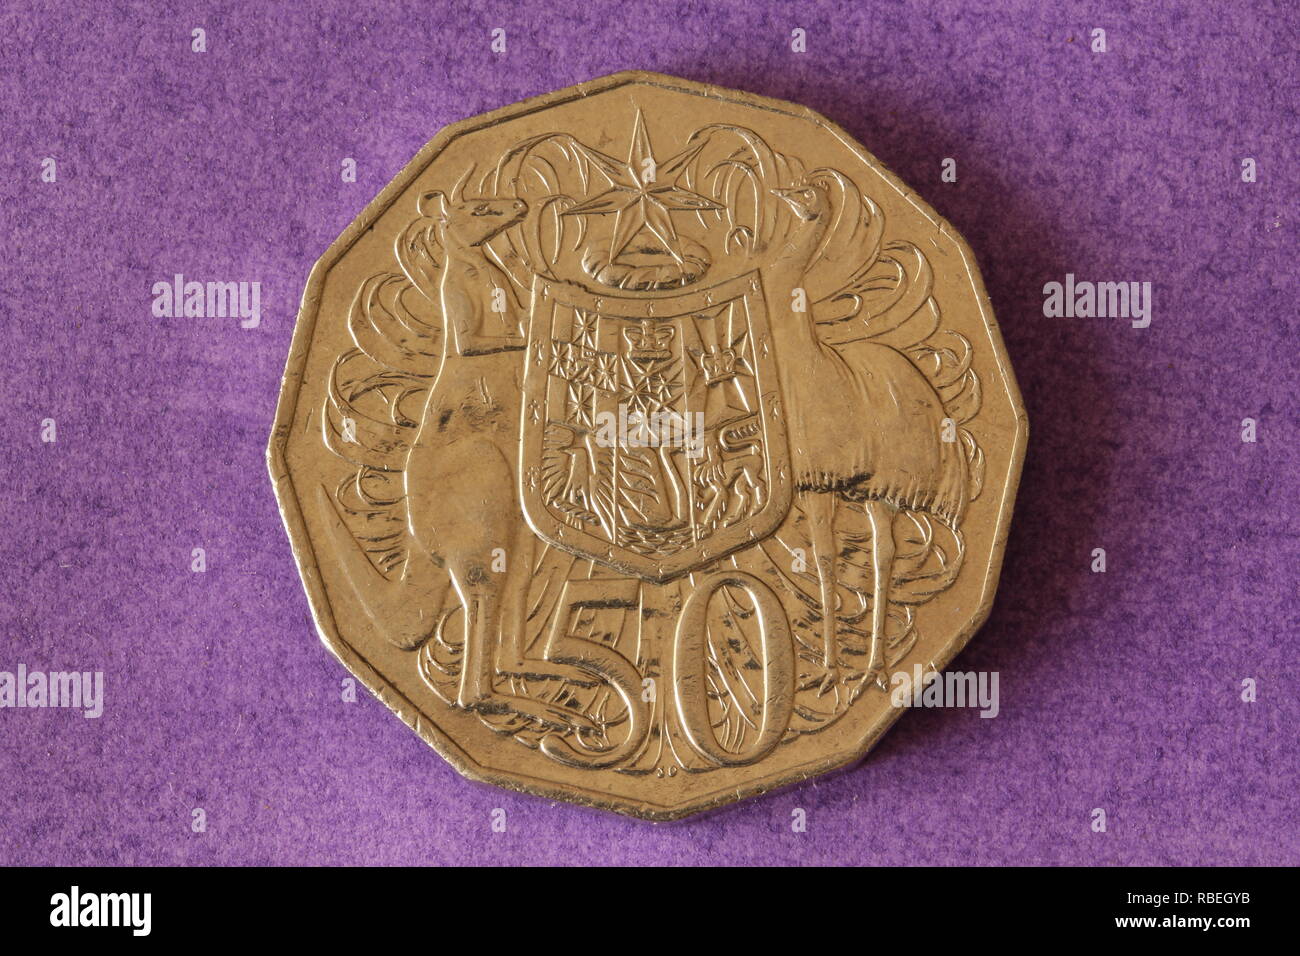 cent coin Stock - Alamy